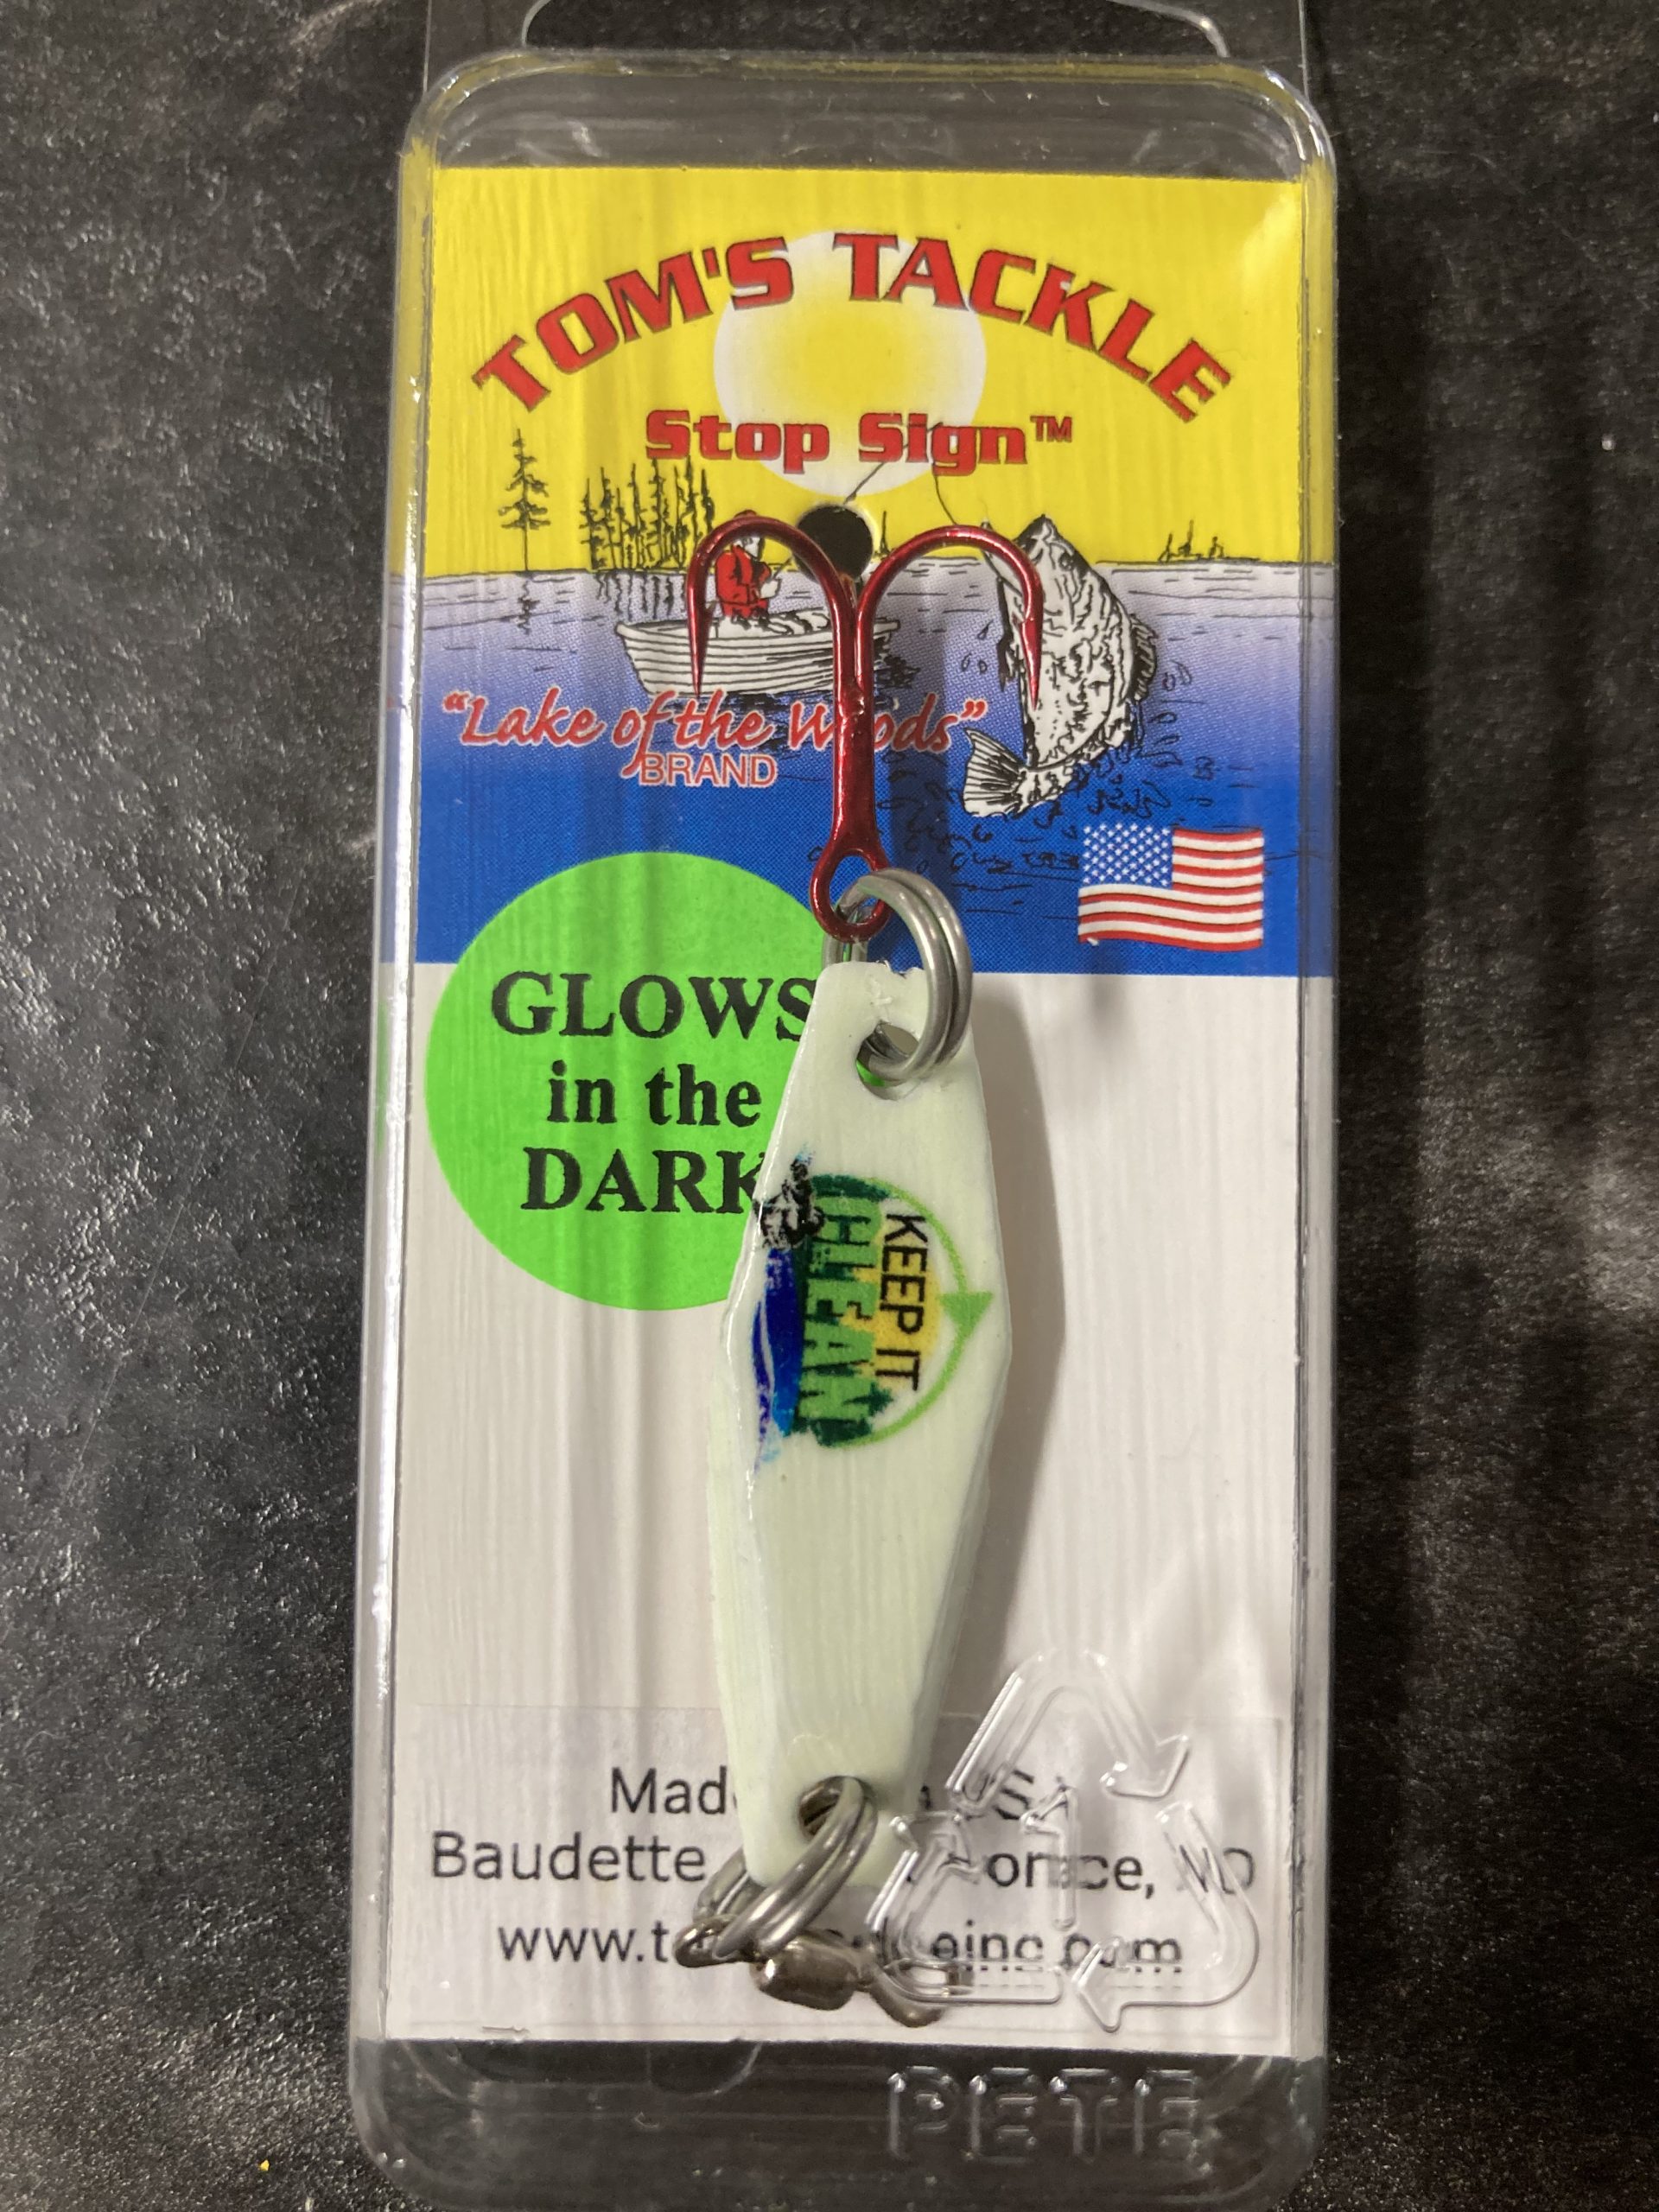 Save Precious Fishing Time, Lure Clips